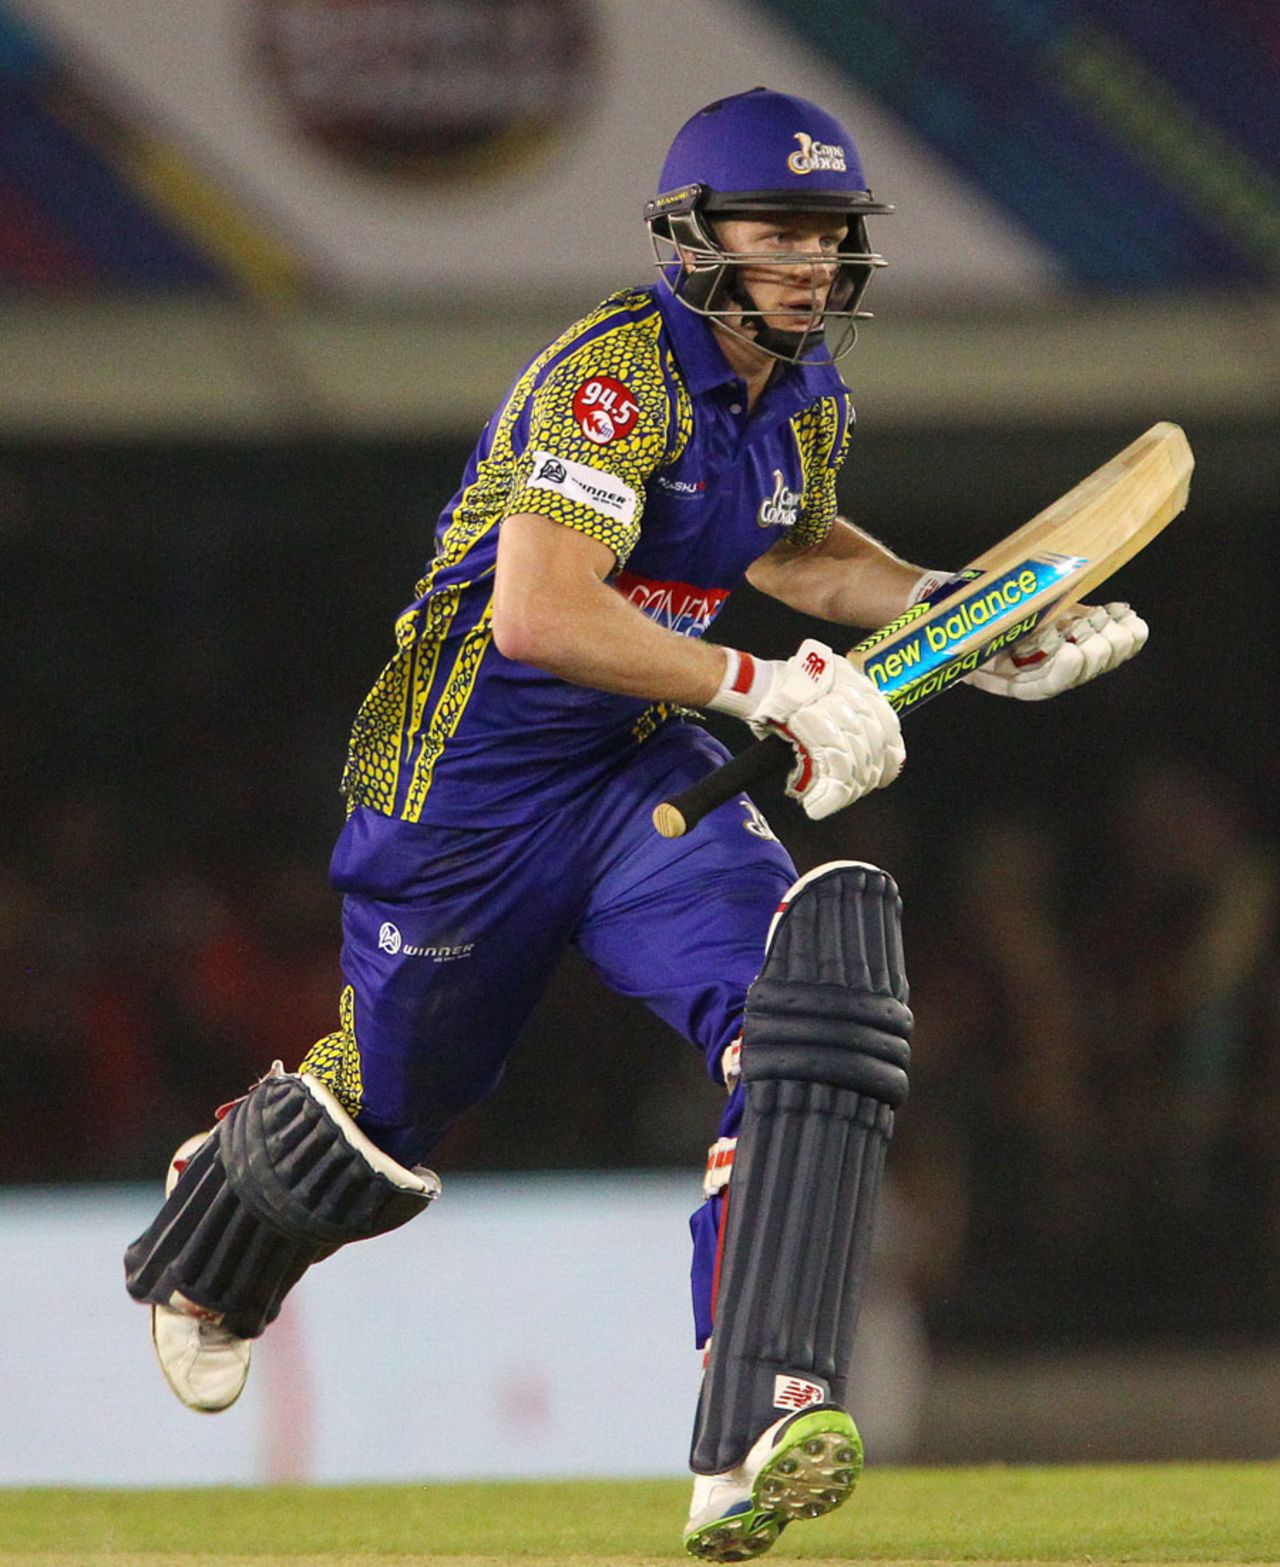 Sybrand Engelbrecht sets off for a run, Barbados Tridents v Cape Cobras, Champions League T20, Group B, Mohali, September 26, 2014